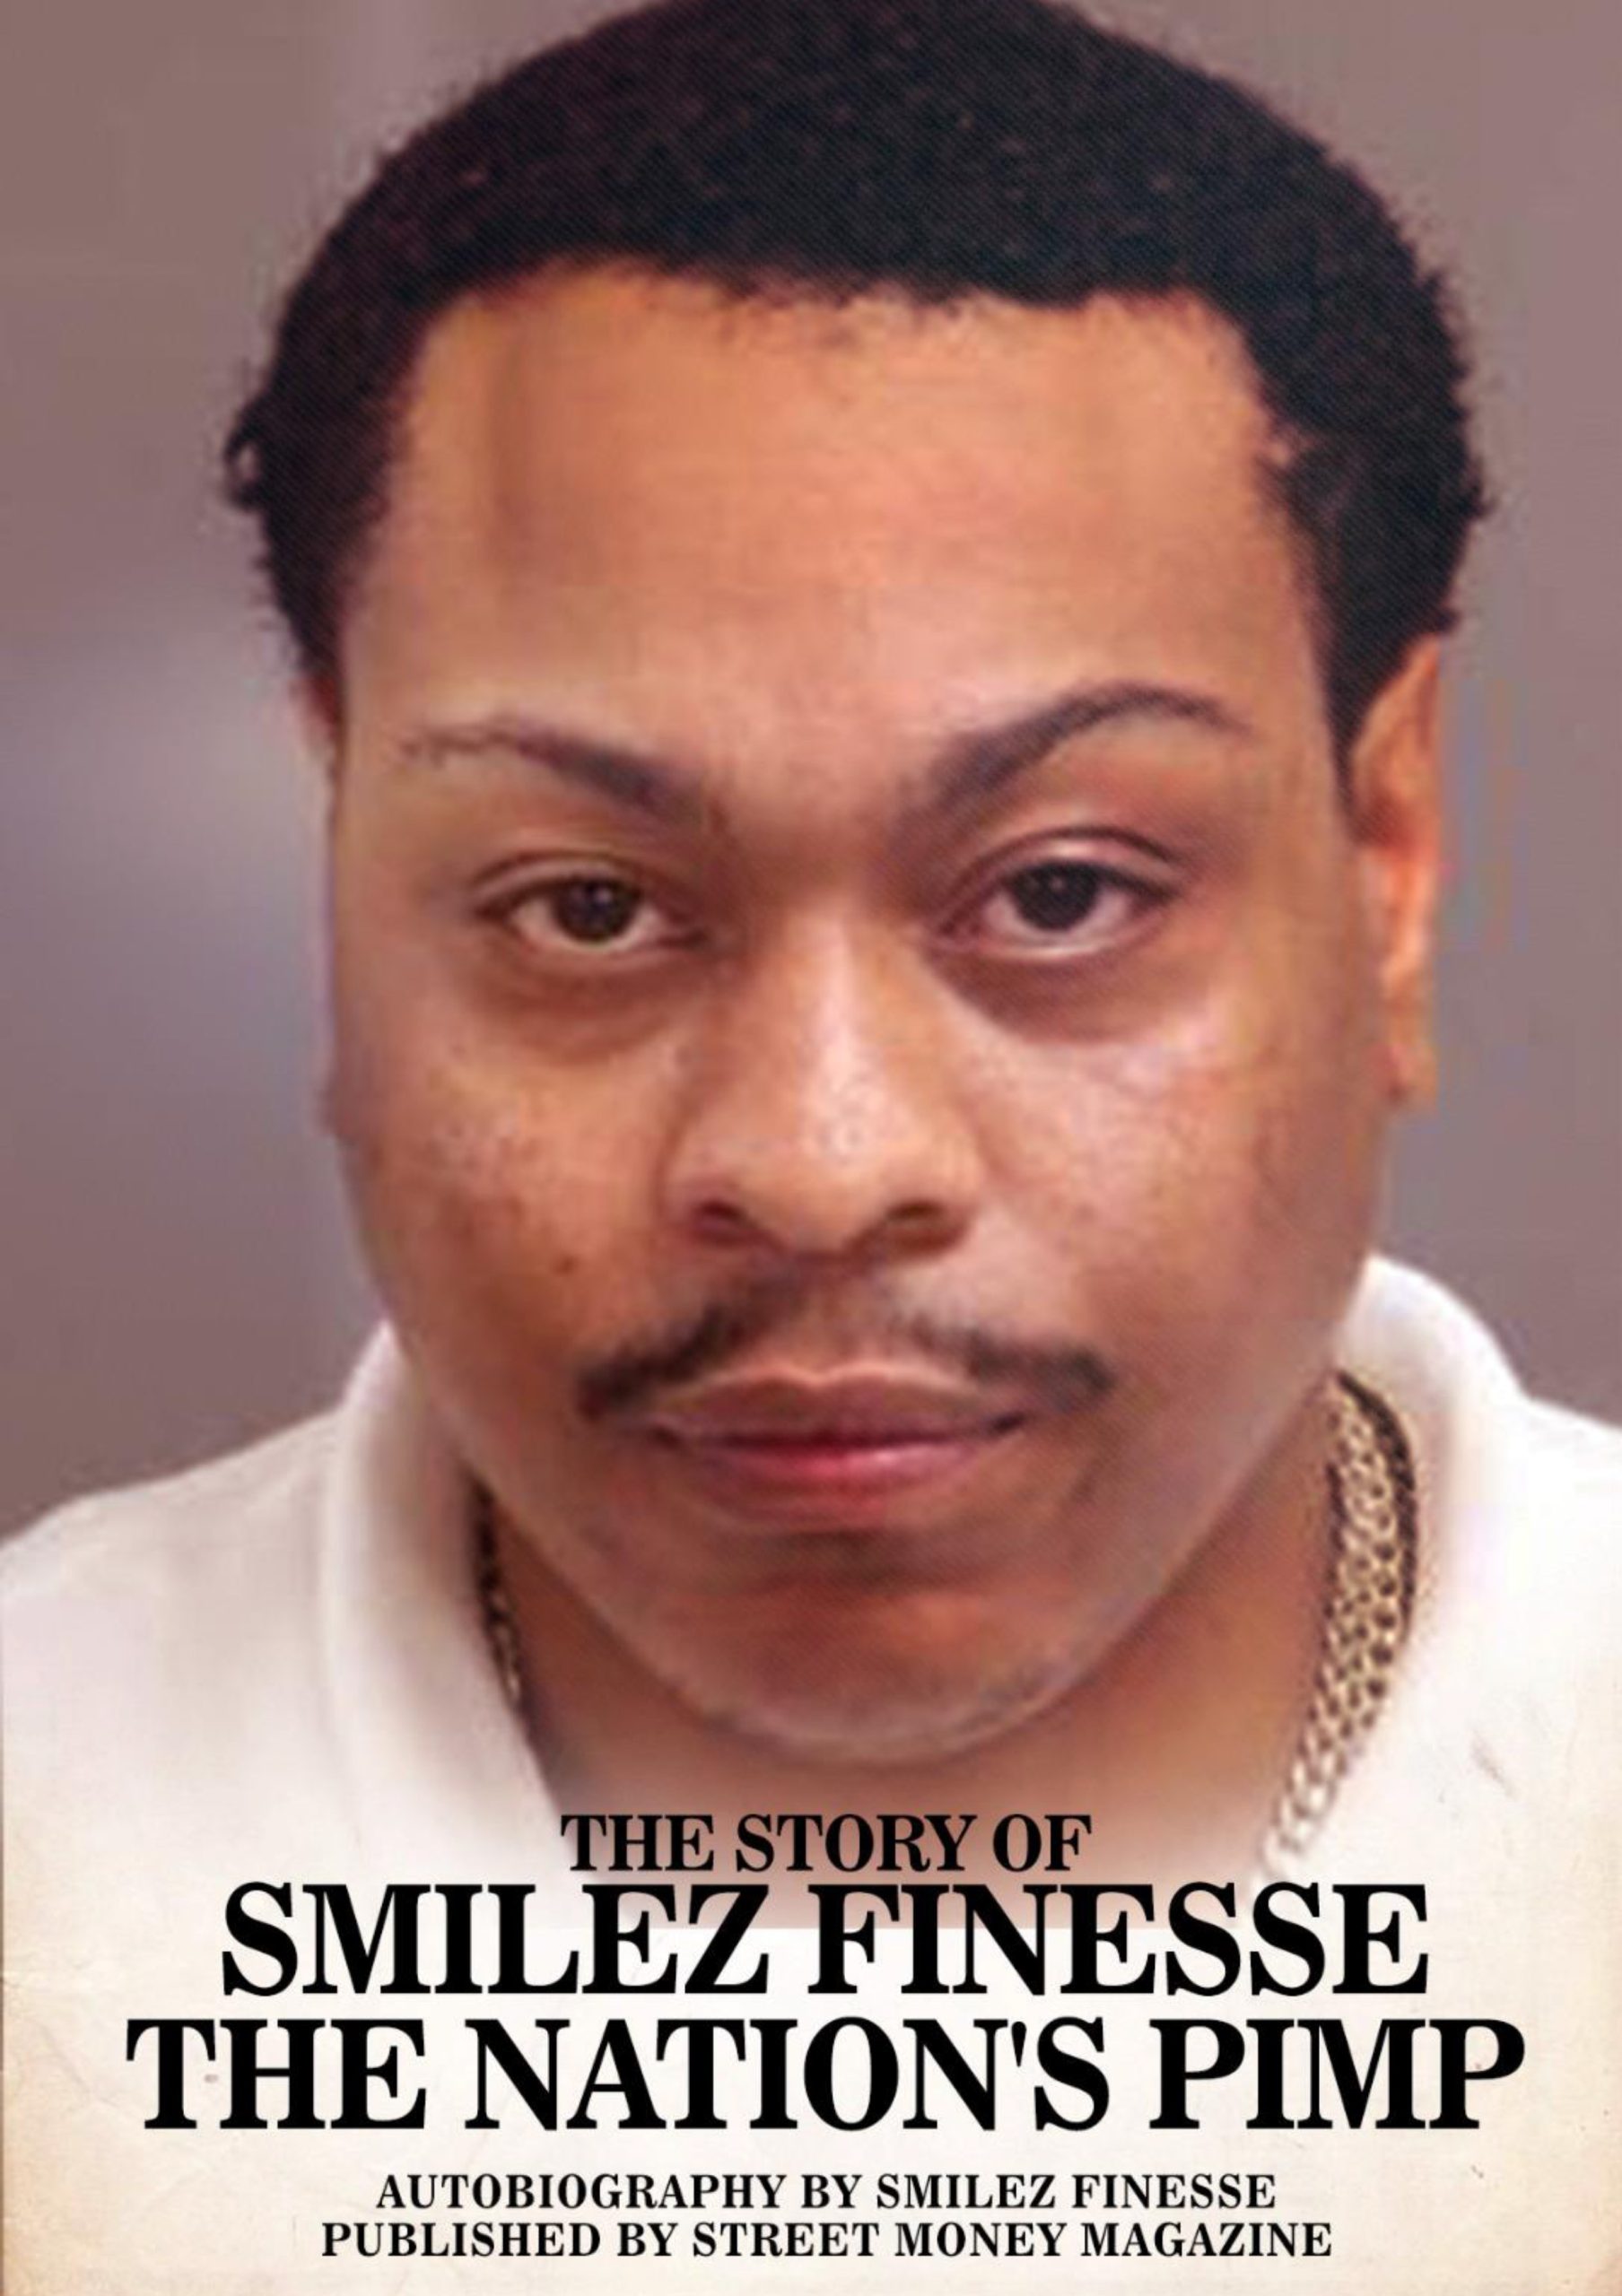 The Story of Smilez Finesse The Nations Pimp